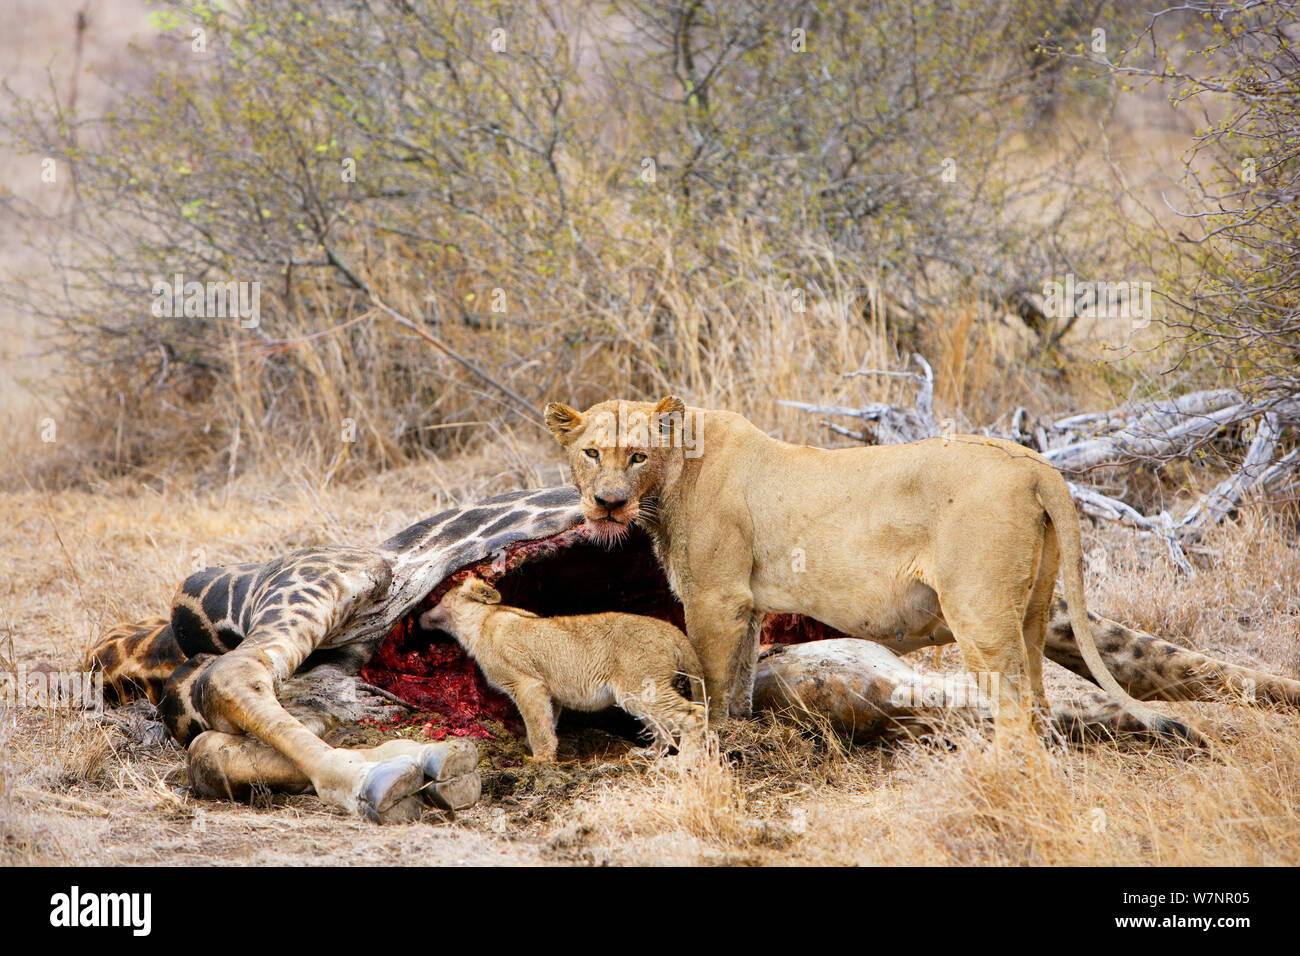 African lioness (Panthera leo) with cub, eating a Giraffe, Kruger National Park, Transvaal, South Africa, September. Stock Photo